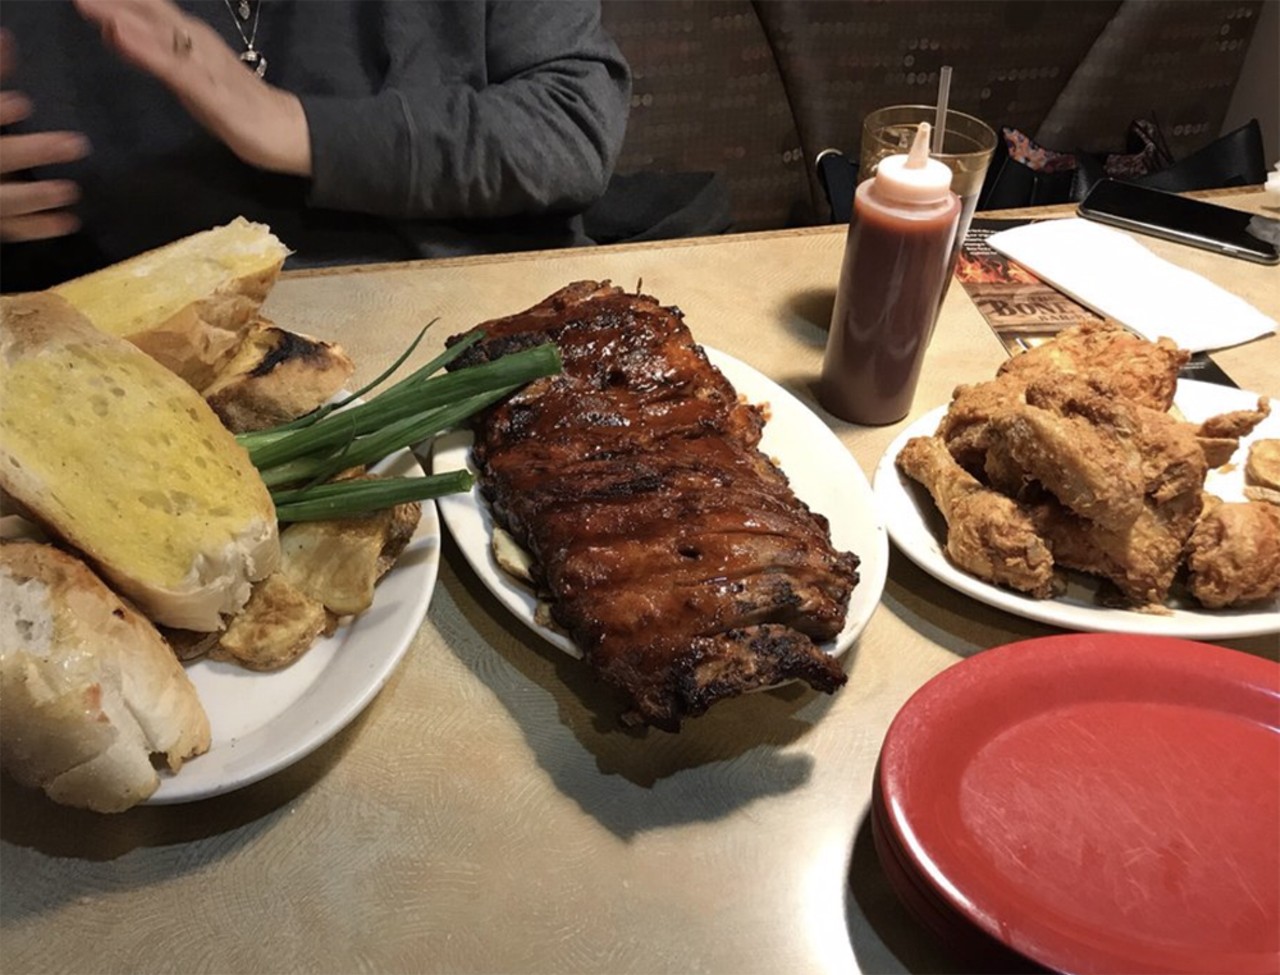 The Bone Yard Bar-B-Que
7010 N. Telegraph Rd., Dearborn Heights; 313-561-0102; theboneyardbbq.com
Opened since 1972, the Bone Yard serves up signature ribs, cooked on an open flame rotisserie.
Photo via Kimberly S. / Yelp